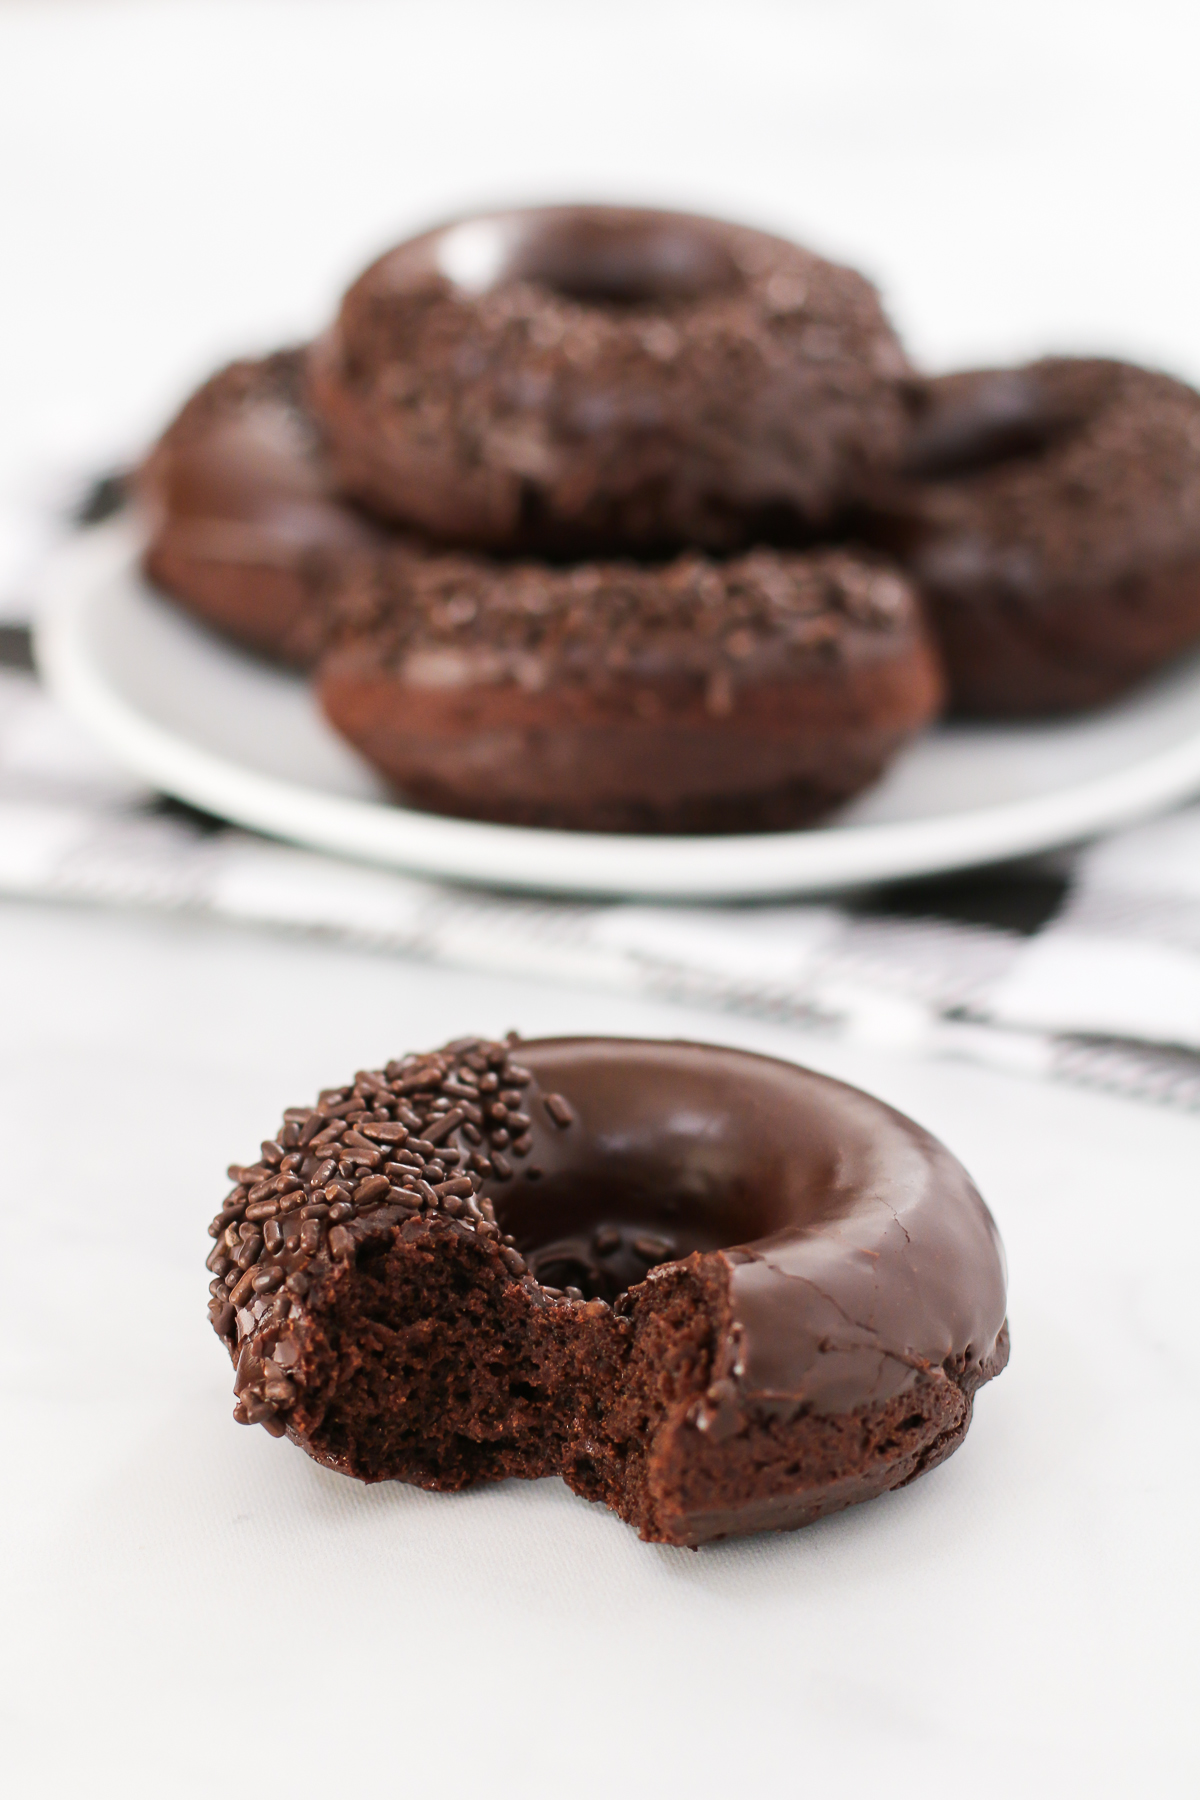 Gluten Free Vegan Baked Chocolate Donuts. Who can resist a chocolate cake donut, dipped in a decadent chocolate glaze and topped with chocolate sprinkles?